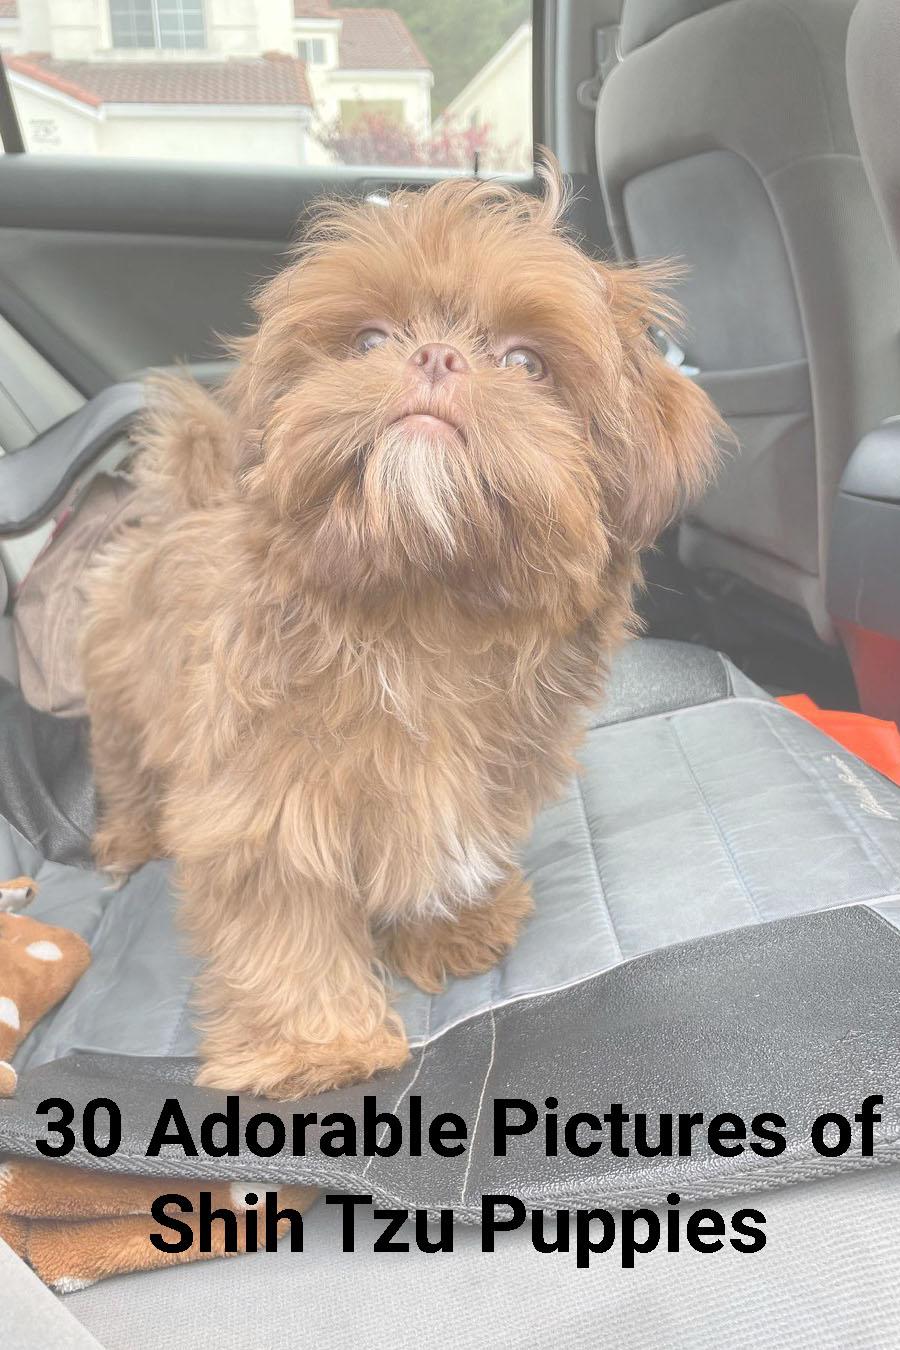 The 25 Cutest Pictures of Teacup Shih Tzus  Teacup shih tzu, Kittens and  puppies, Cute little puppies